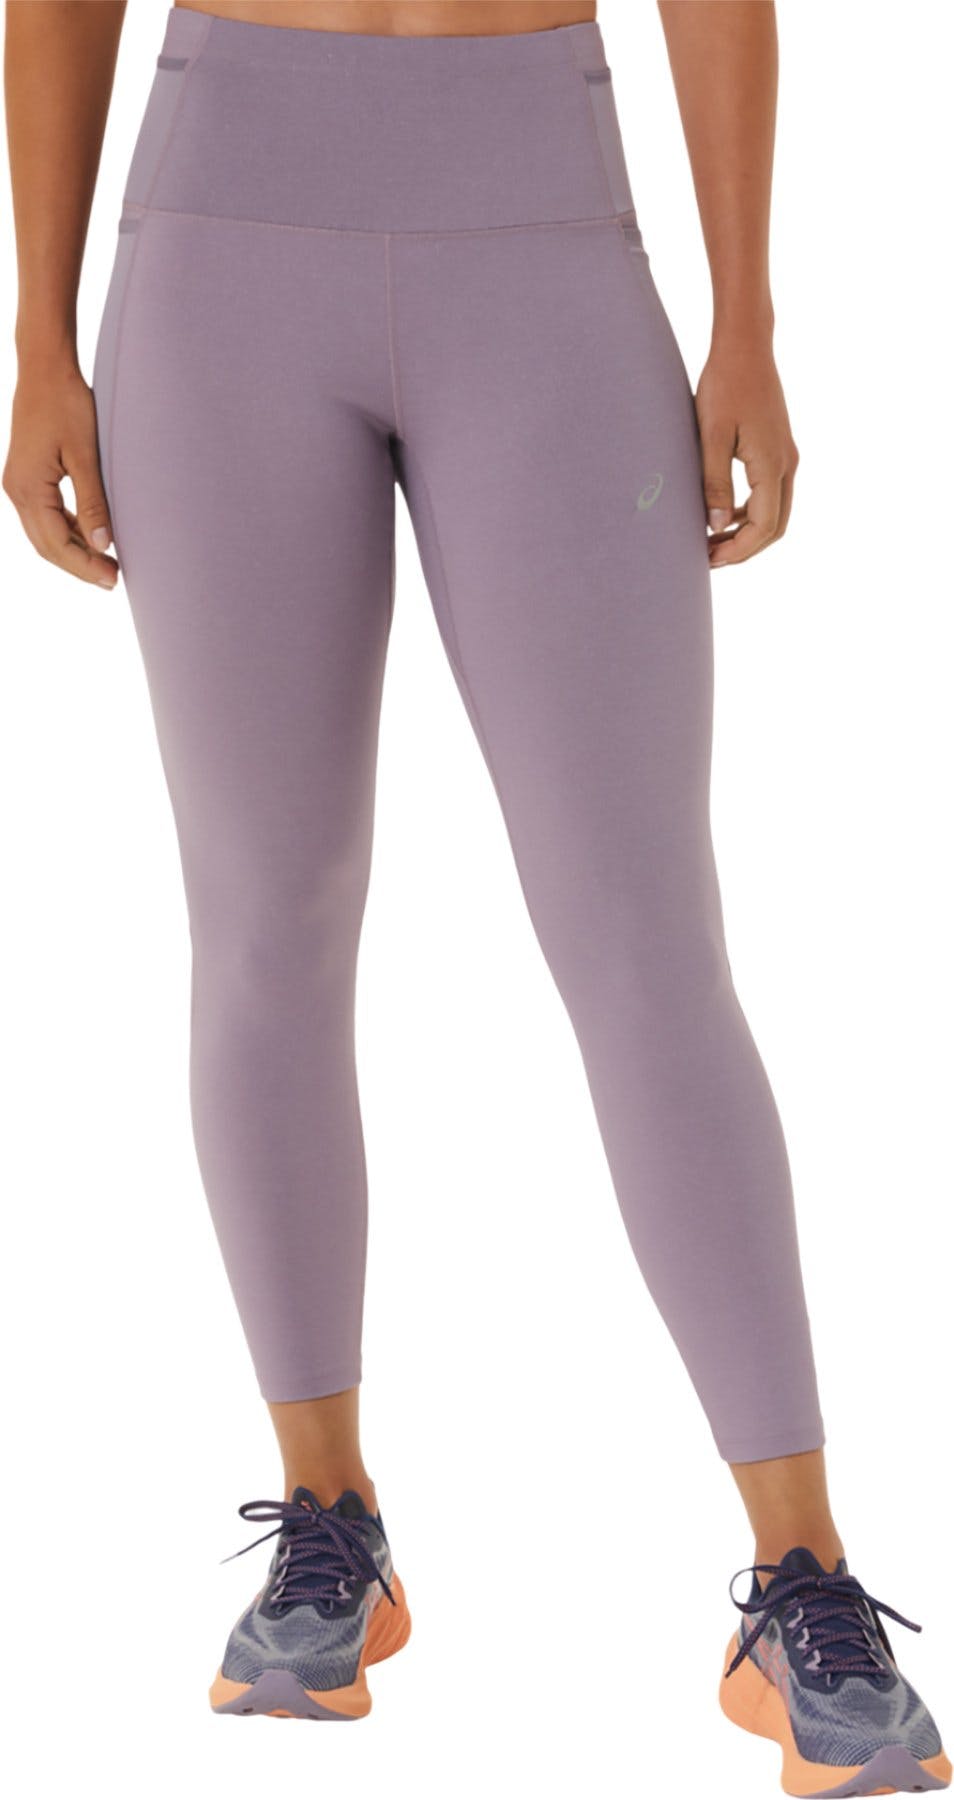 Product image for Distance Supply 7/8 Tight - Women's